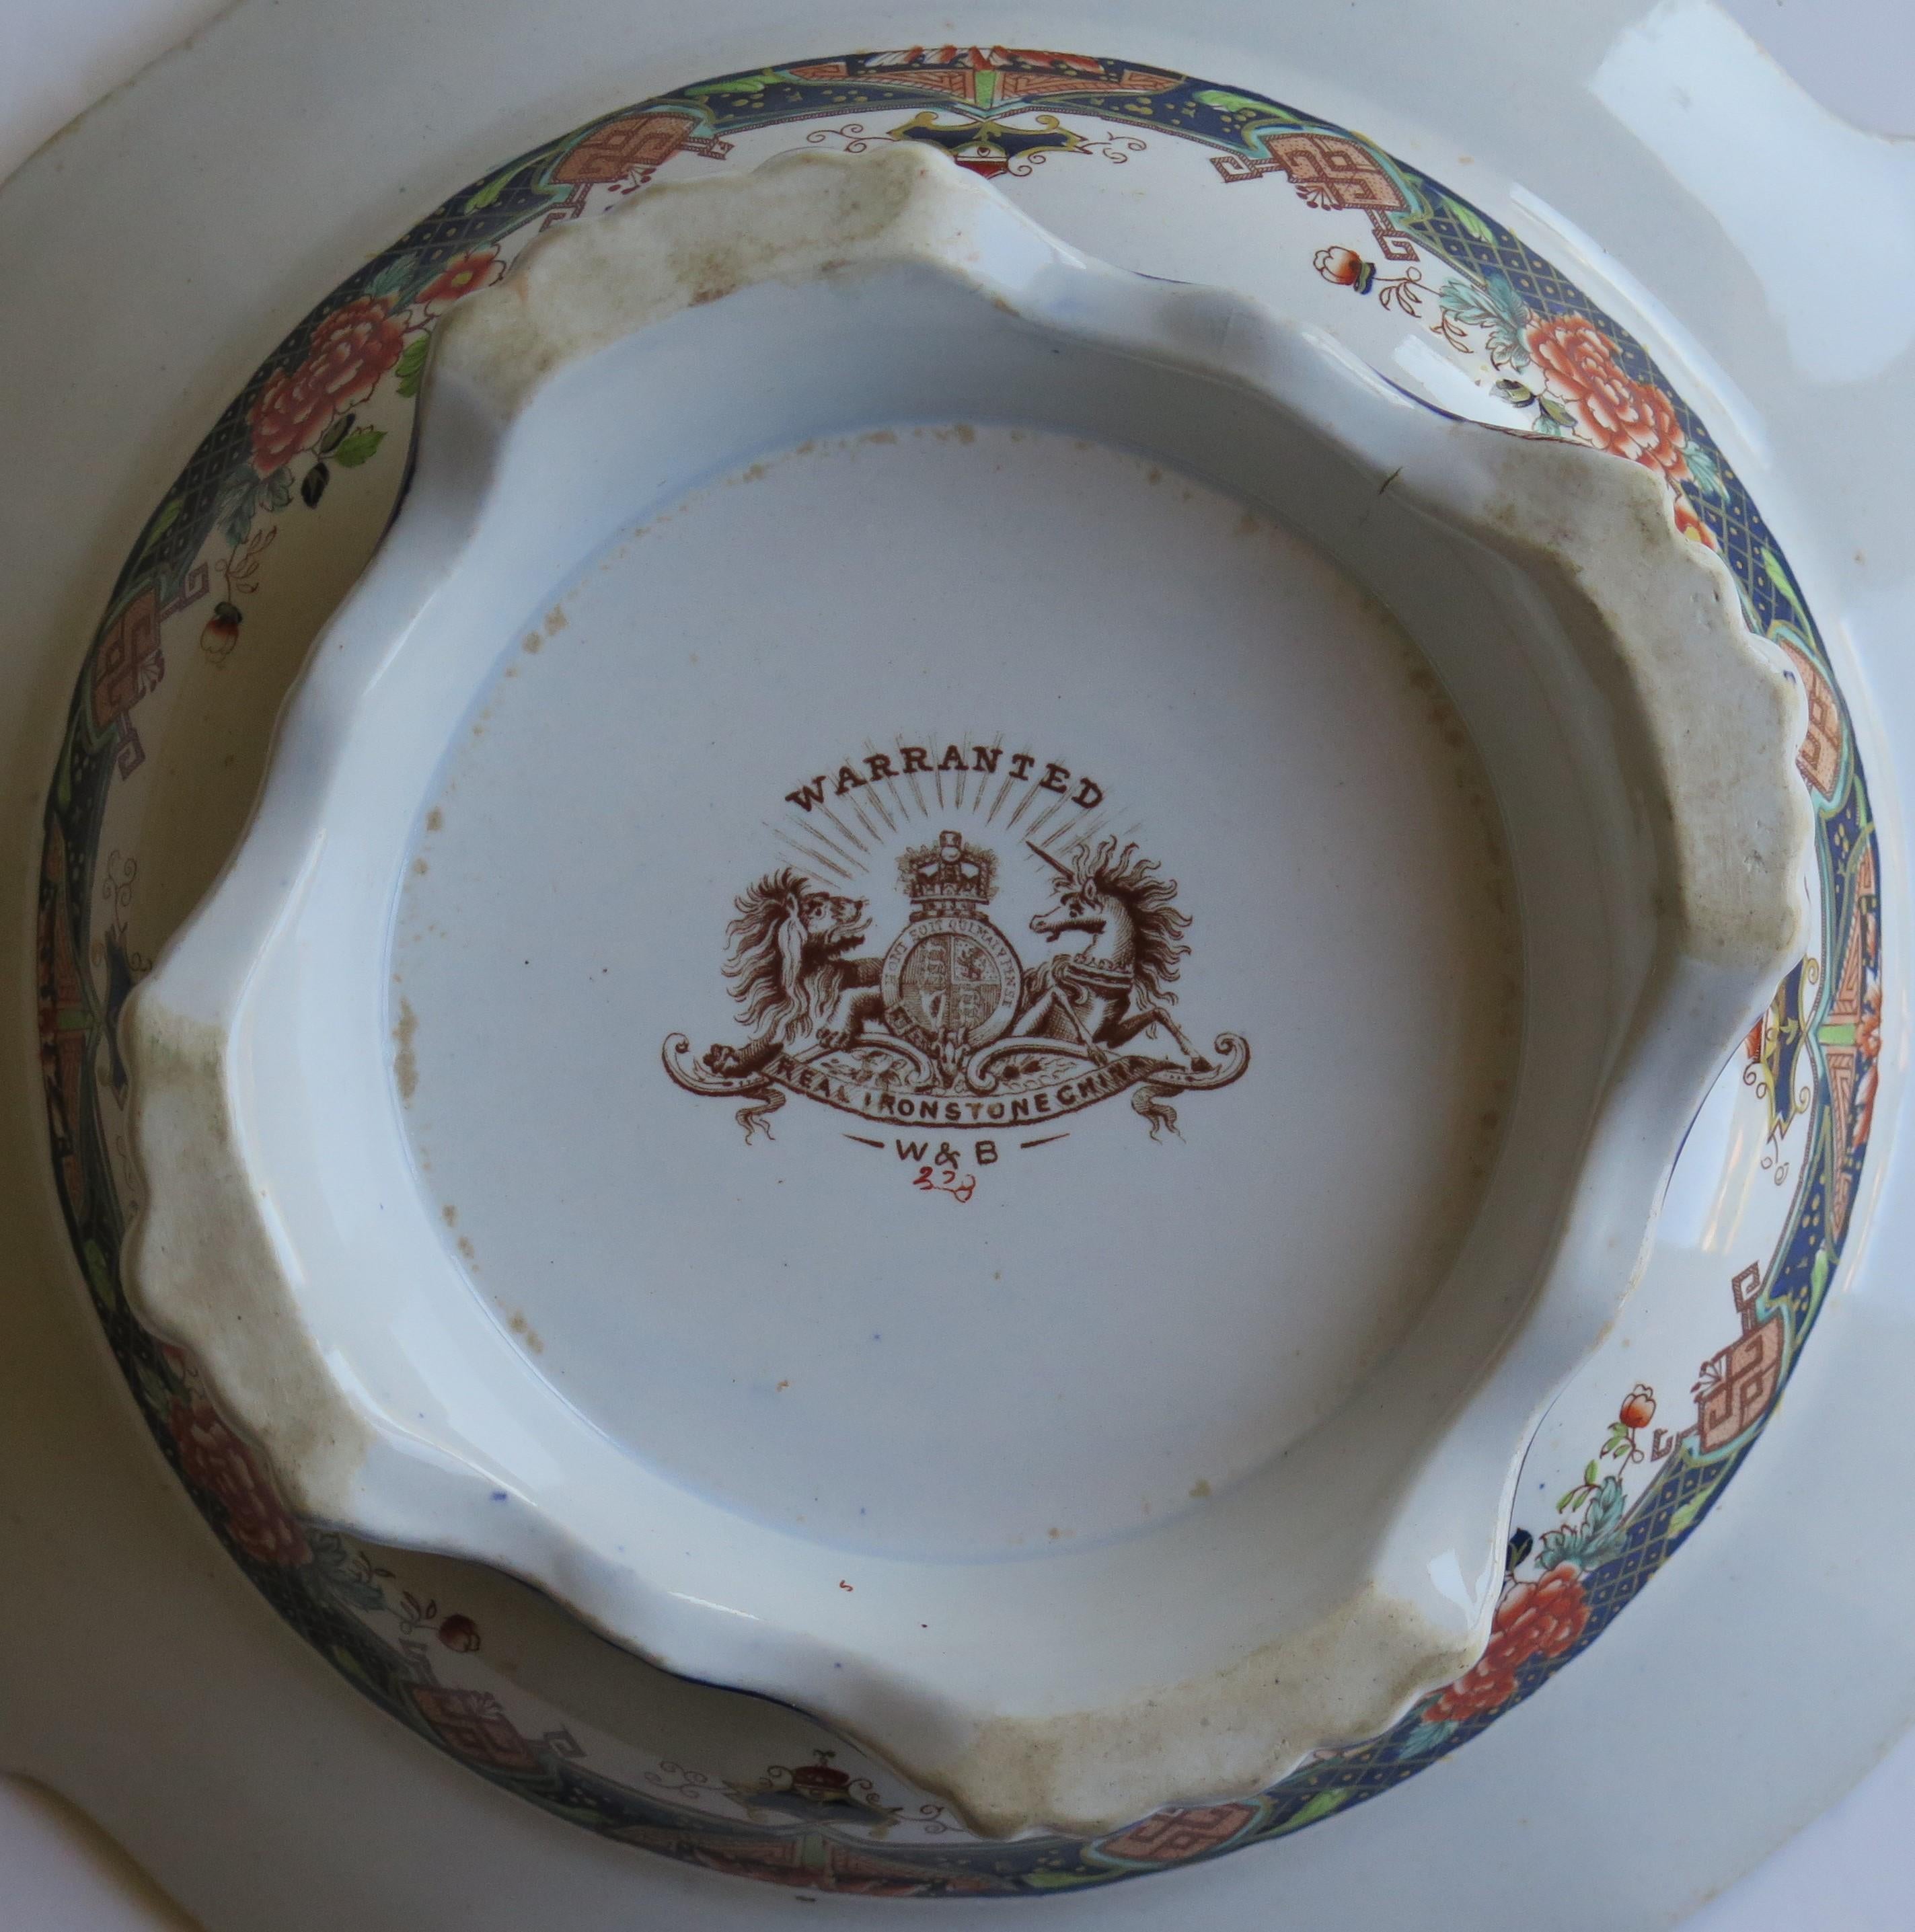 Pedestal Bowl by Wood & Brownfield Ironstone large diameter Ptn 328, circa 1845 For Sale 4